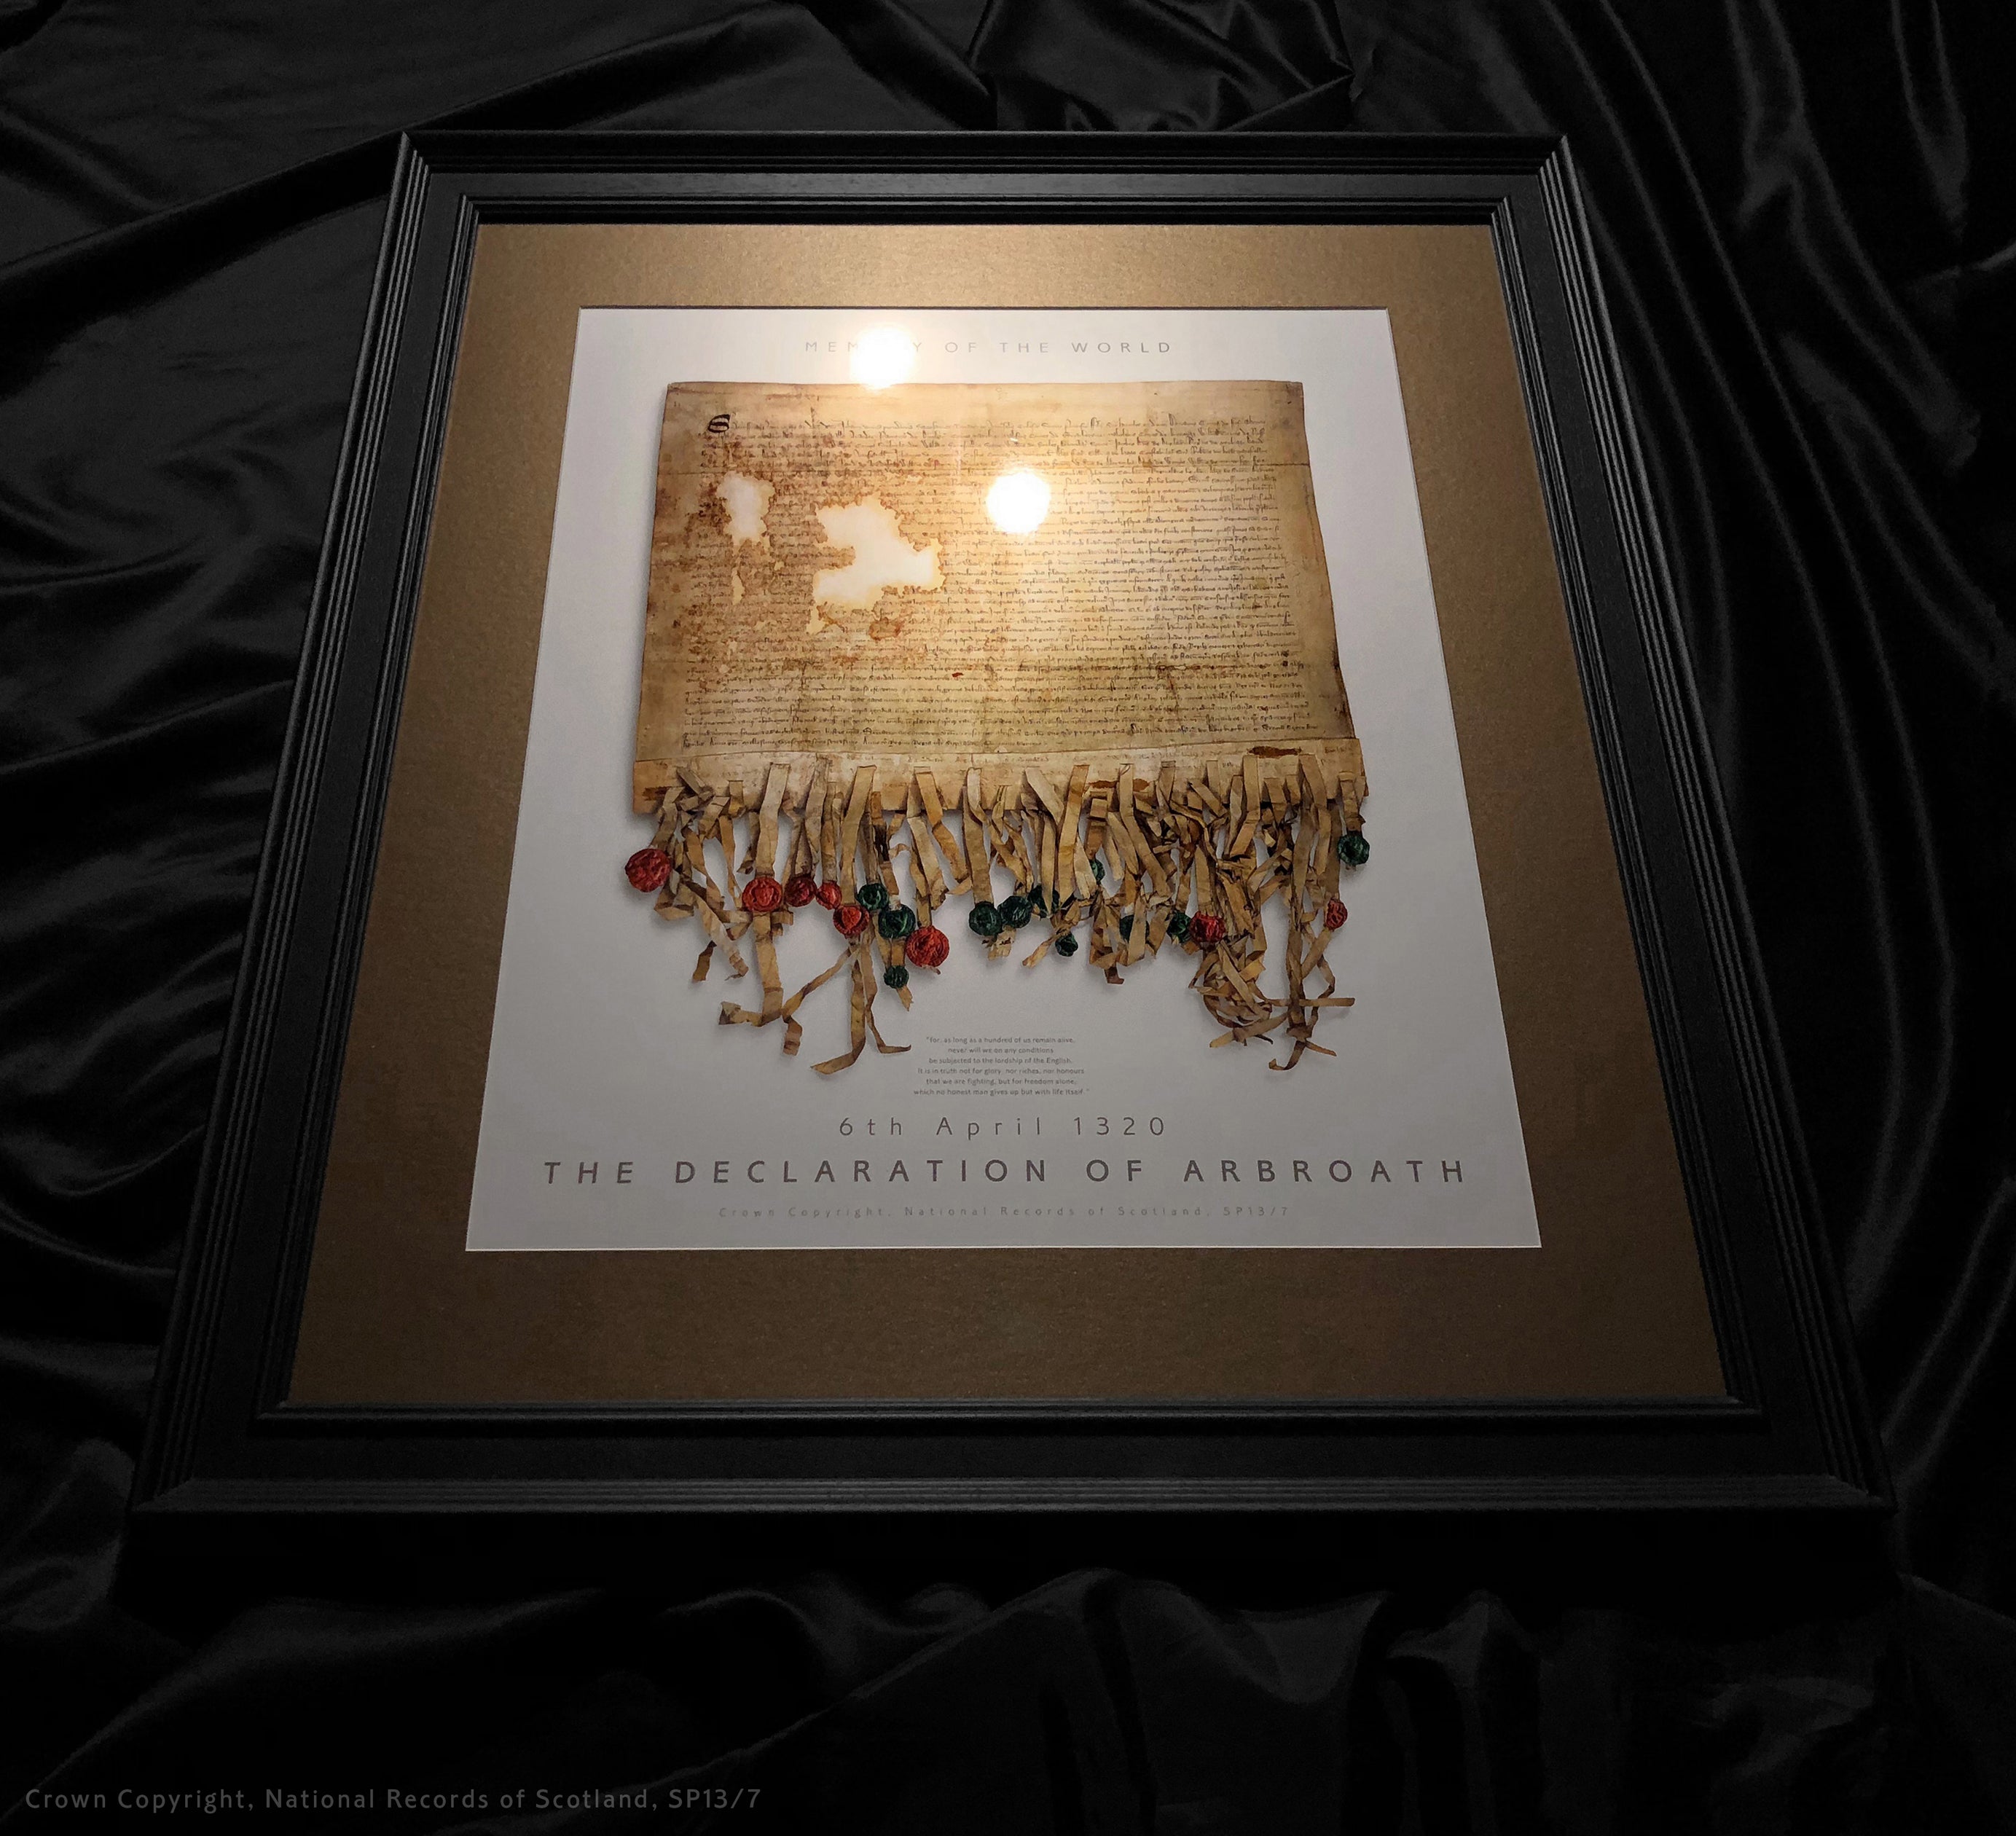 DECLARATION OF ARBROATH - GOLD metallic print editions - Produced on the latest generation C-Type Chromira Light-jet printer - only 700 copies - Pearl edition bronze mount